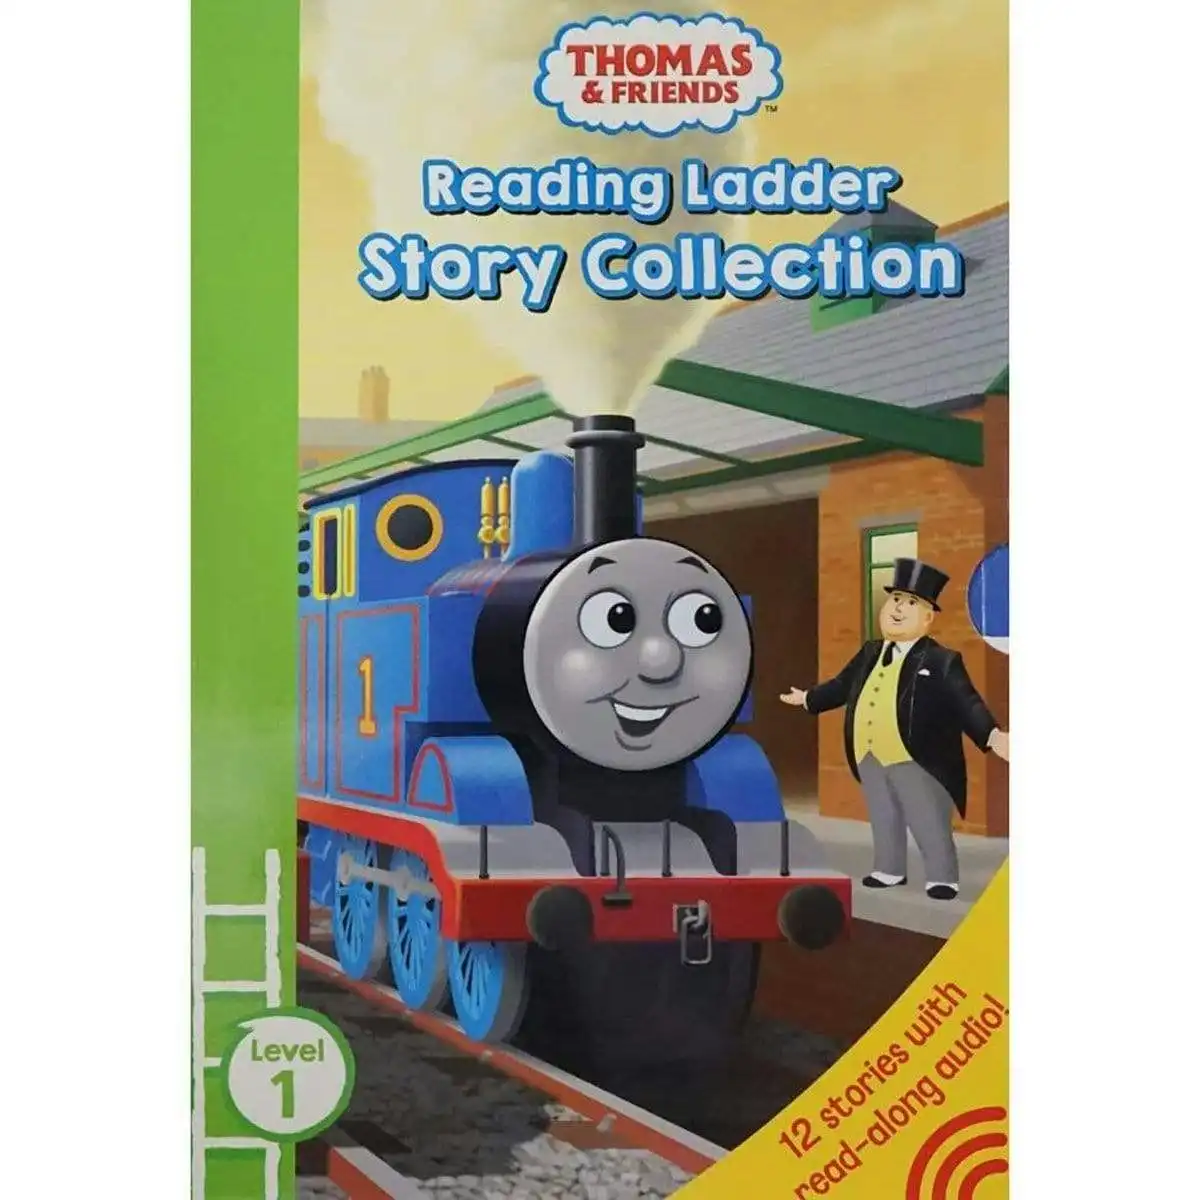 Promotional Thomas & Friends Reading Ladder Story Collection